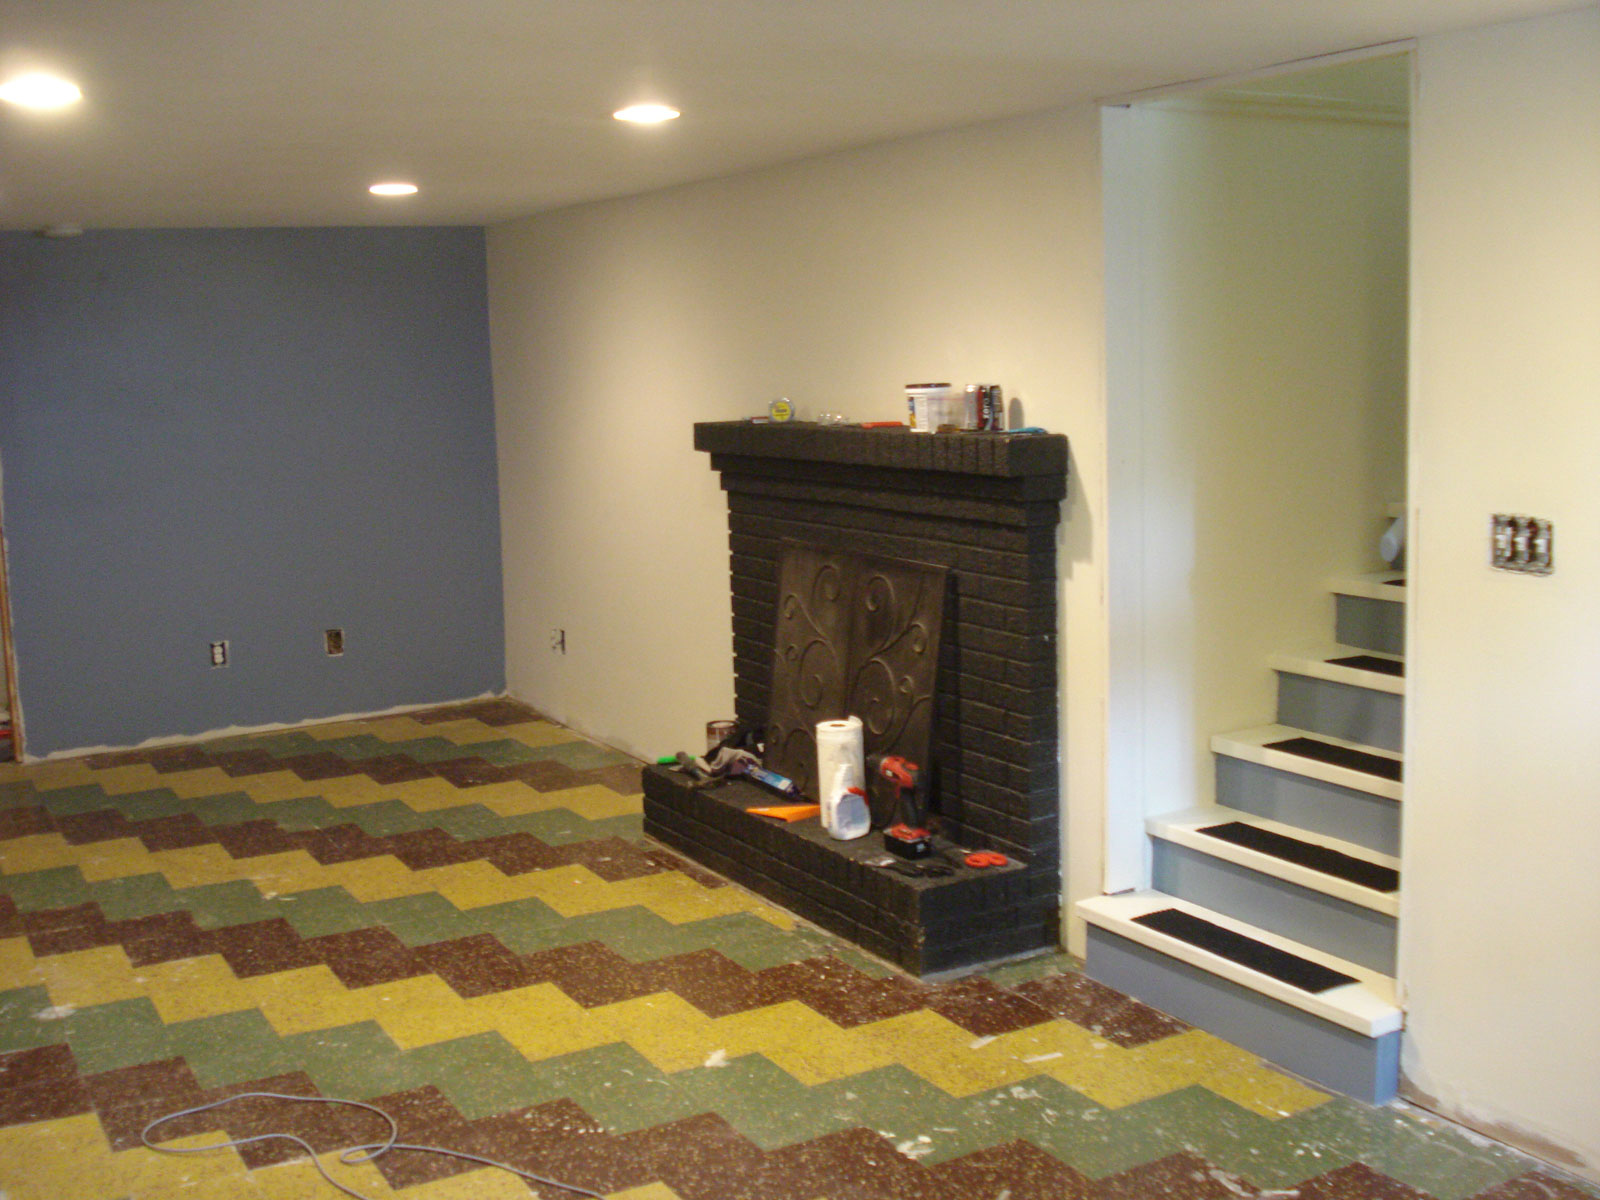 Basement Floor Ideas Painting Basement Floor Split Colors Ideas Combined With Best Pool House Designs Idea And Small Fireplace Design Idea Decoration  Painting Basement Floor For The Least Expensive Solution 